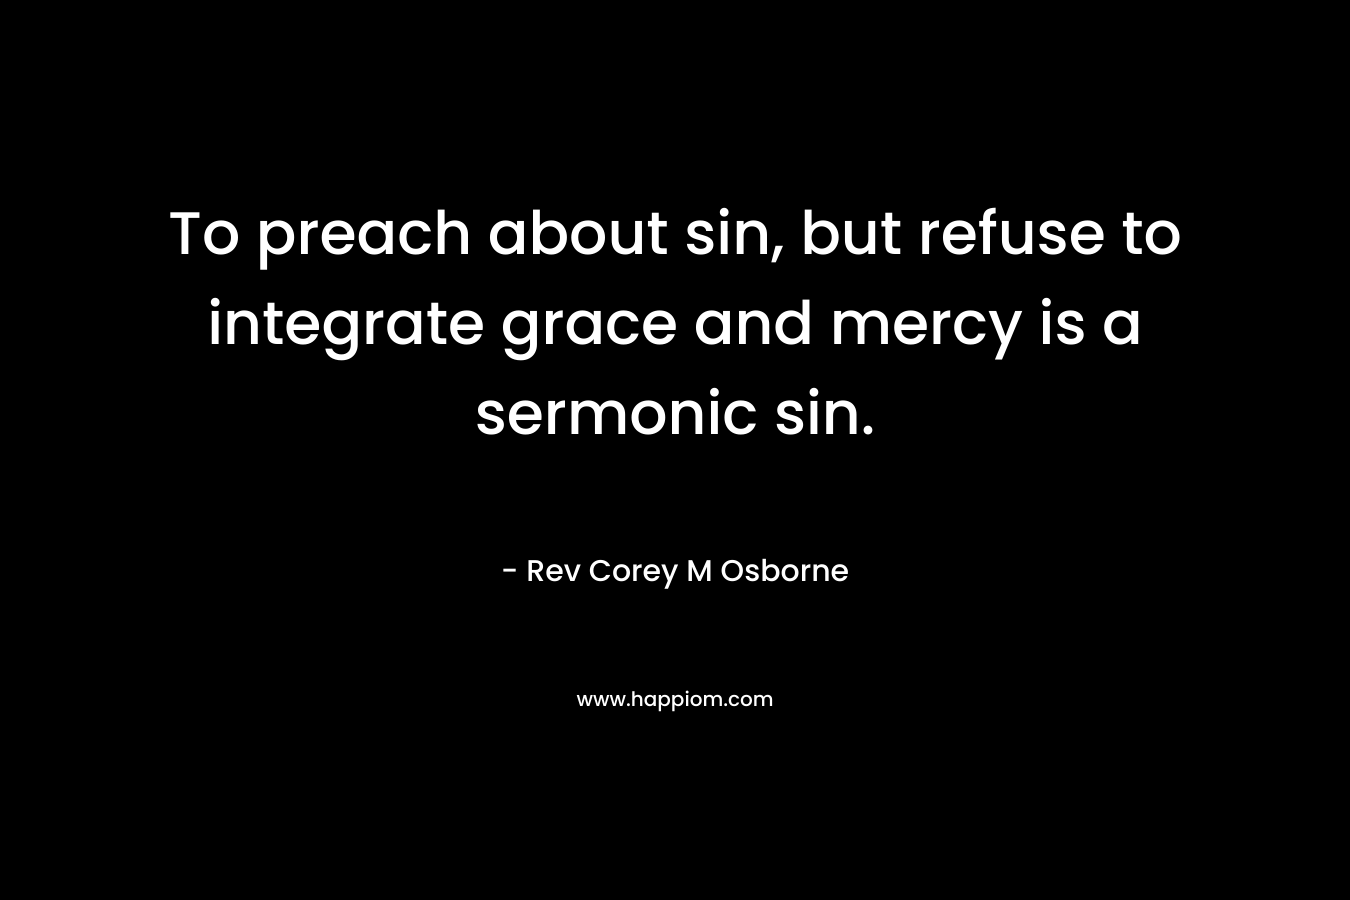 To preach about sin, but refuse to integrate grace and mercy is a sermonic sin.